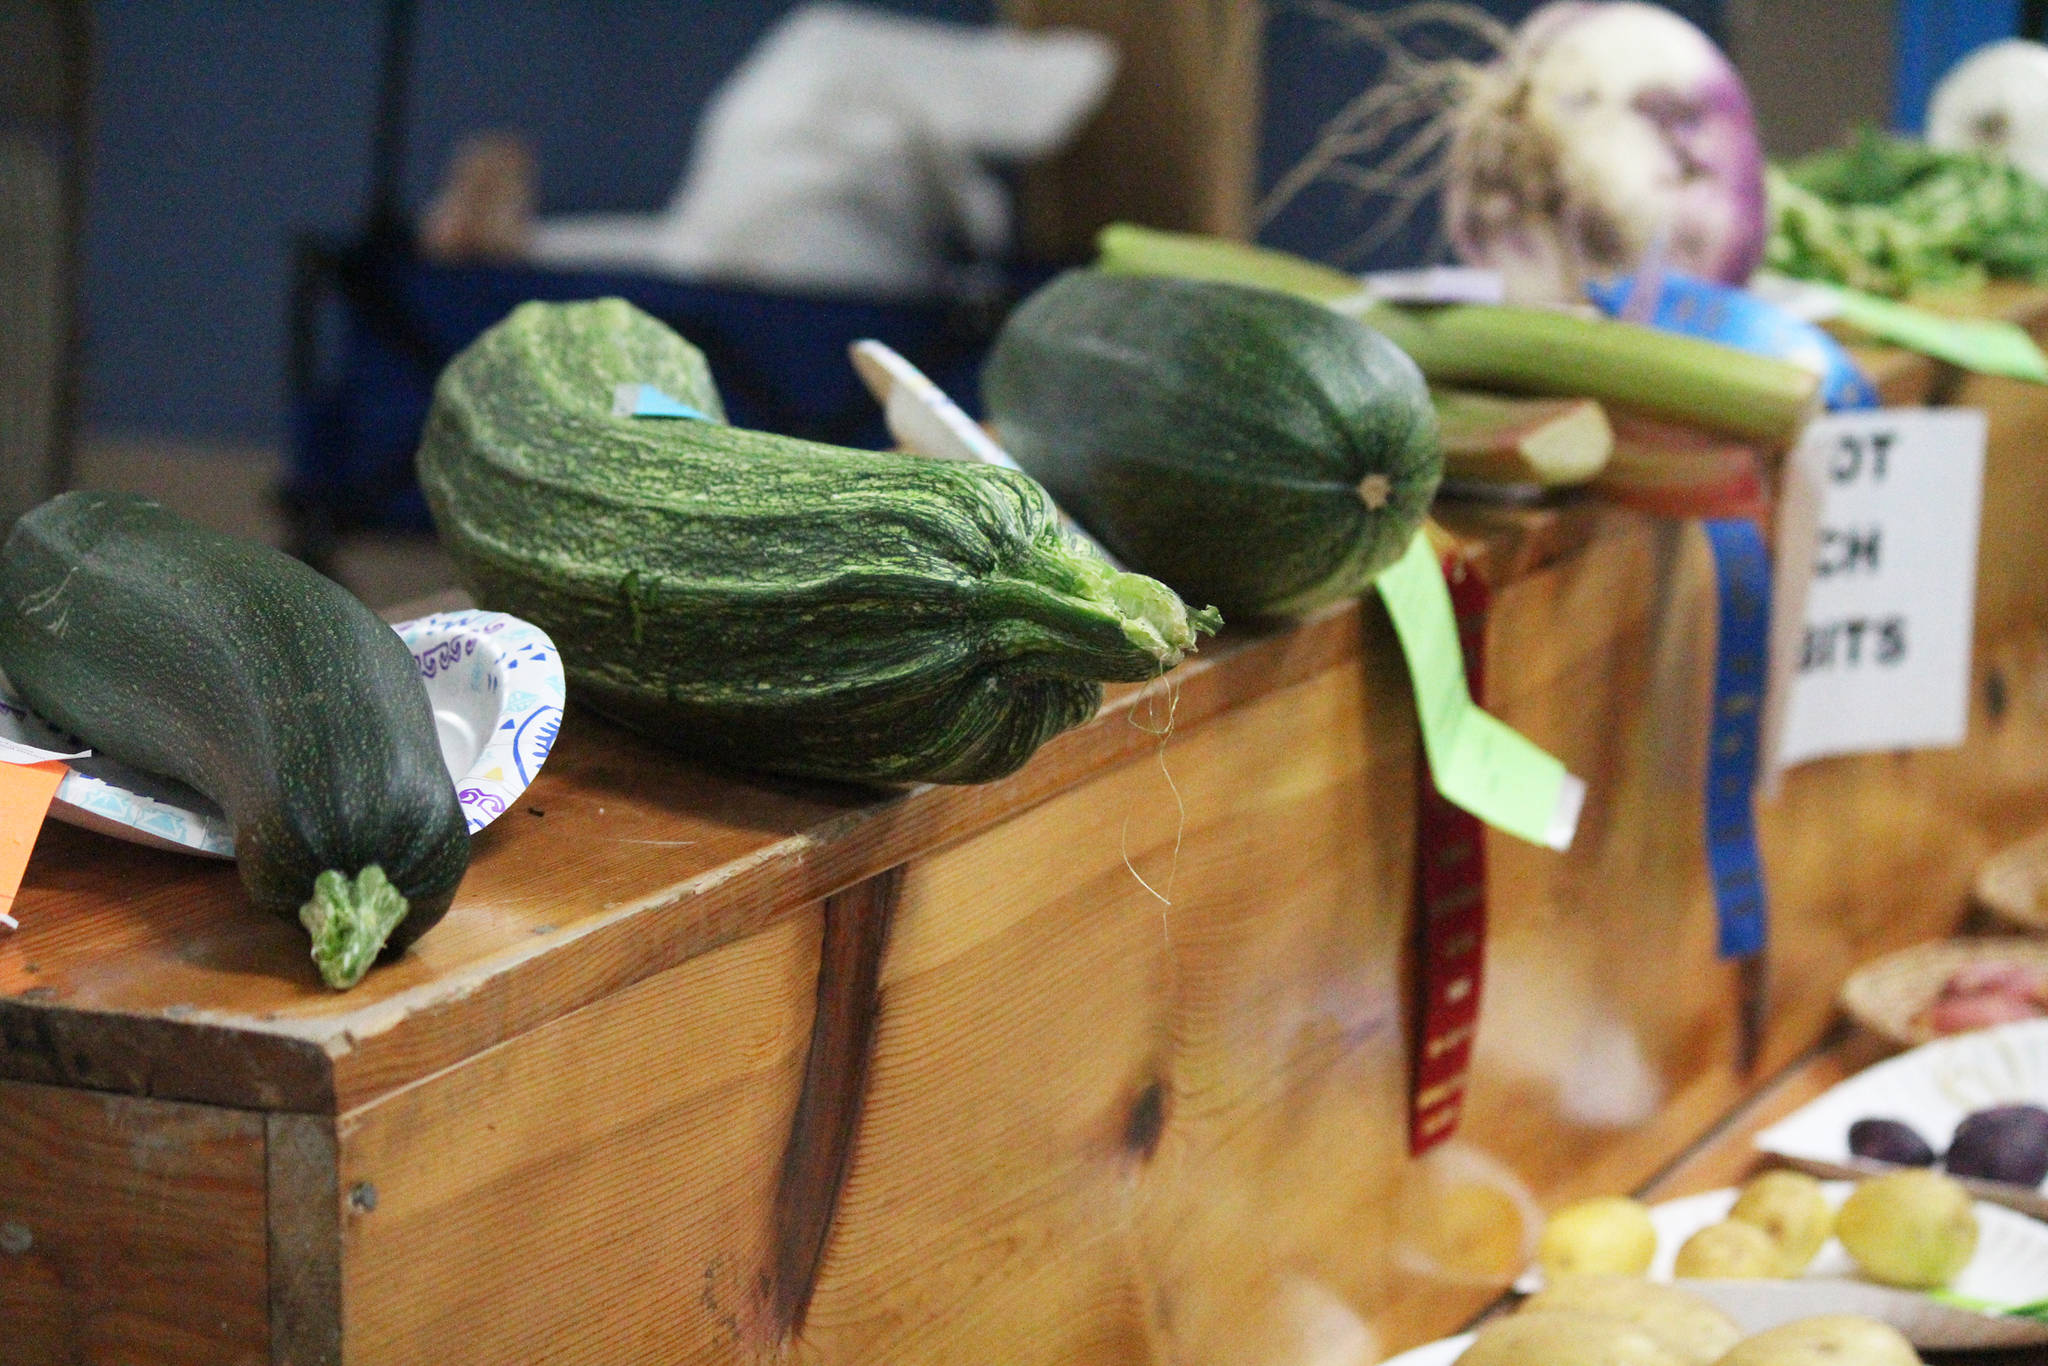 Prize-winning vegetables sit on display in one of the buildings on the Kenai Peninsula Fairgrounds on Saturday, Aug, 18, 2018 at the annual fair in Ninilchik, Alaska. (Photo by Megan Pacer/Homer News)